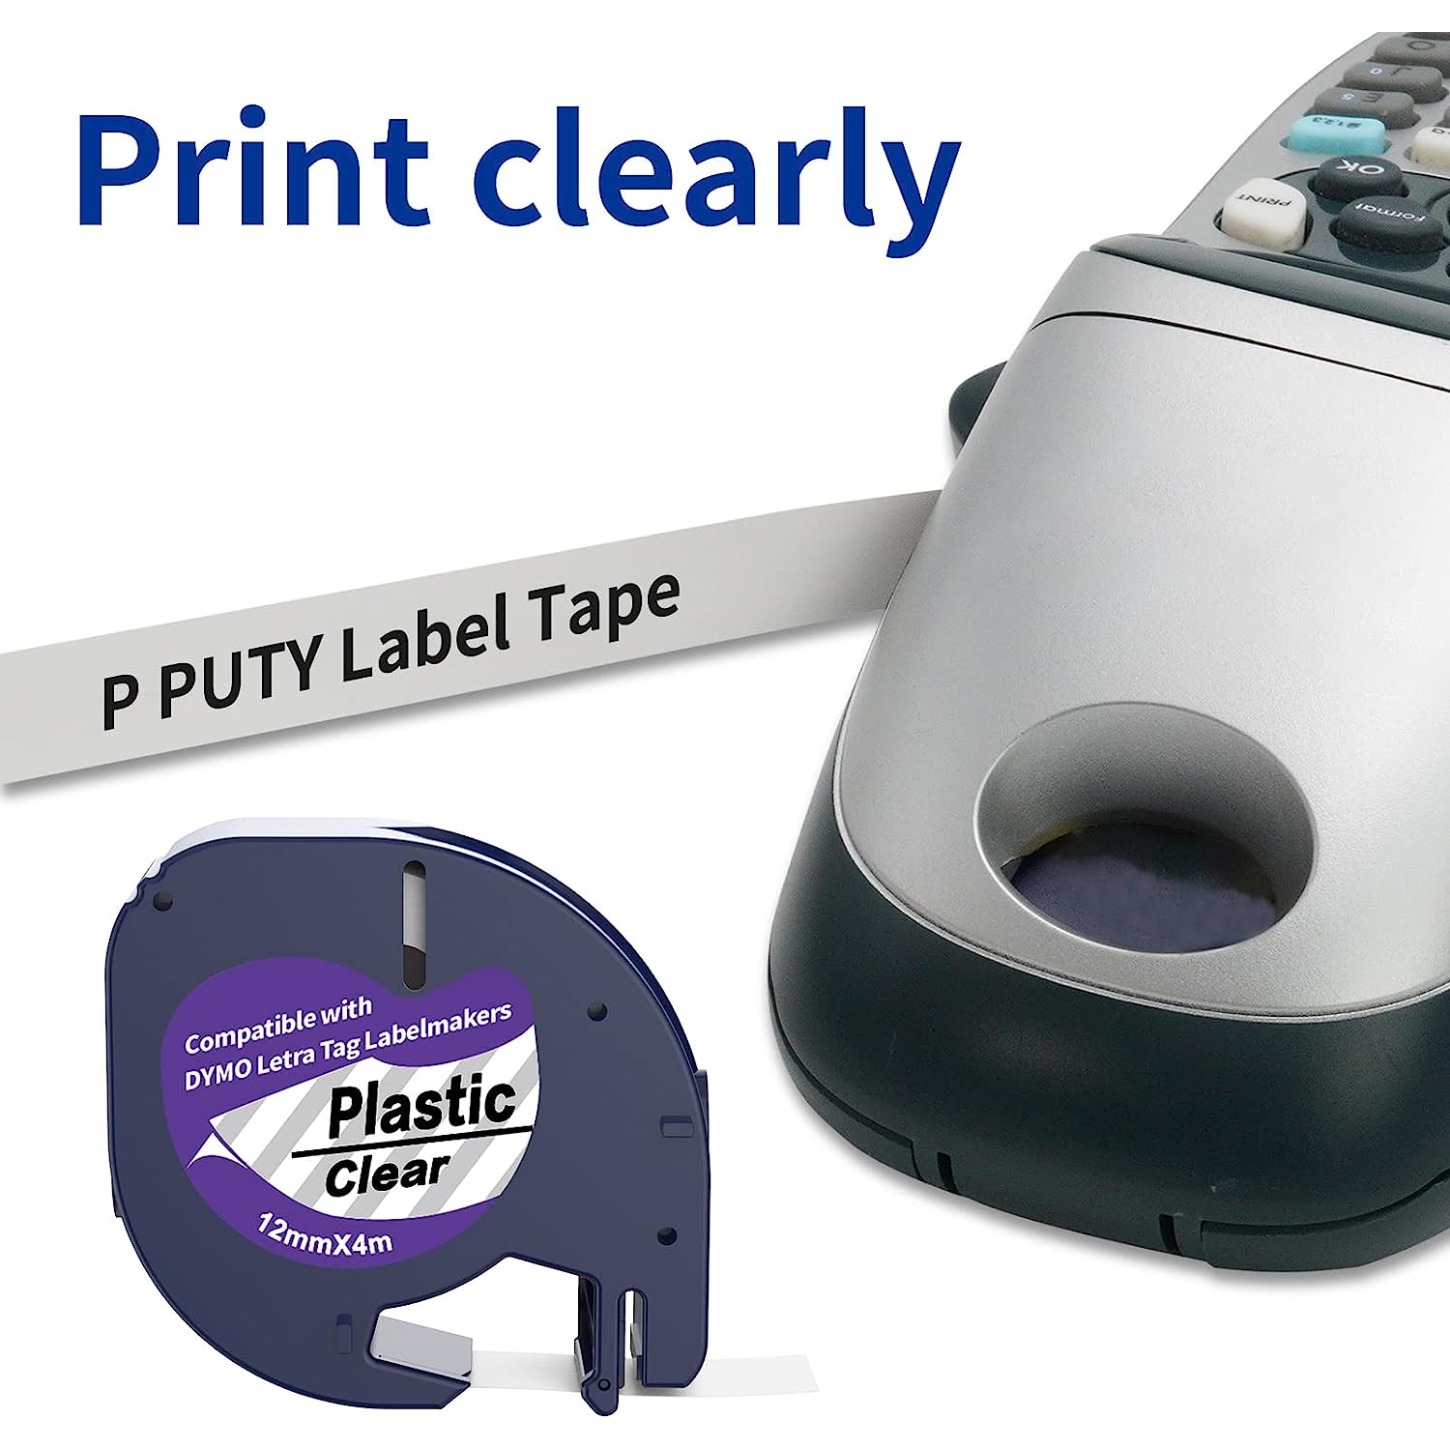  Dymo Letratag LT100H Label Maker : Office Products